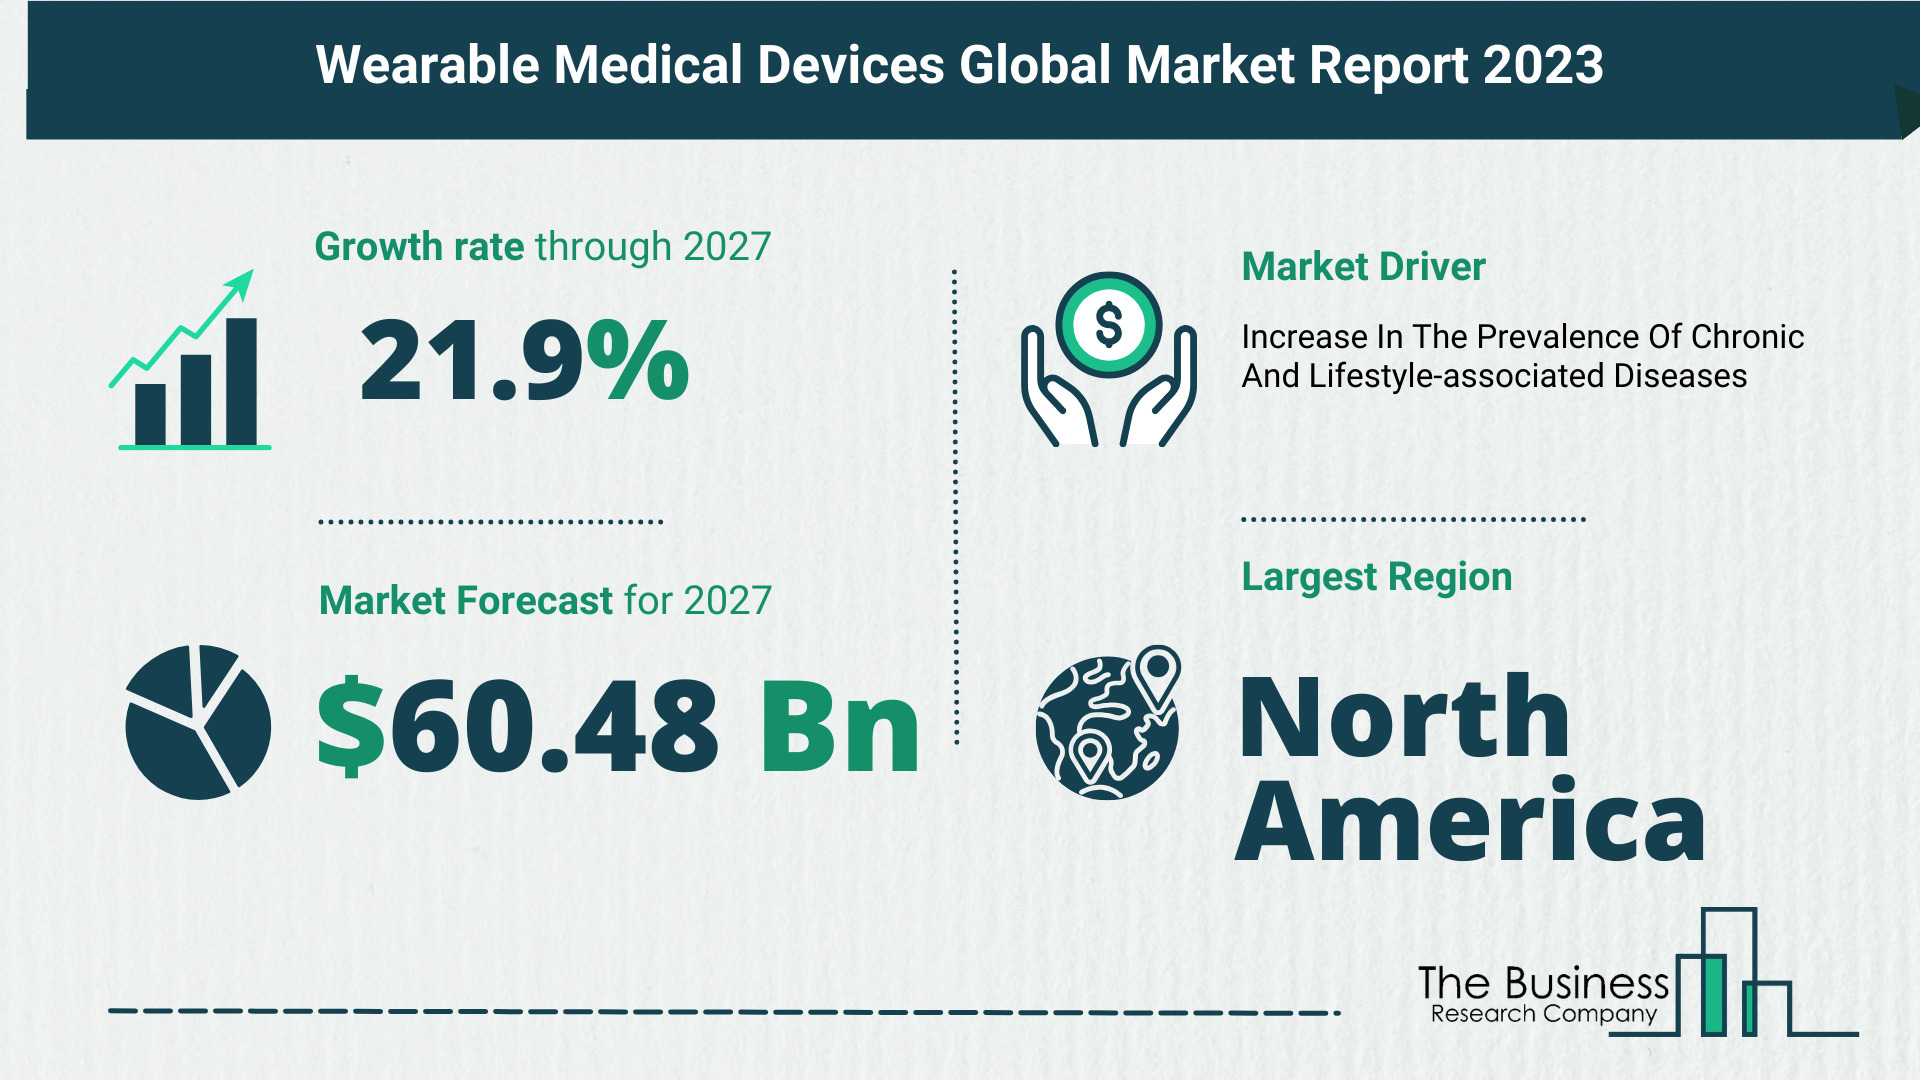 Global Wearable Medical Devices Market Analysis: Estimated Market Size And Growth Rate